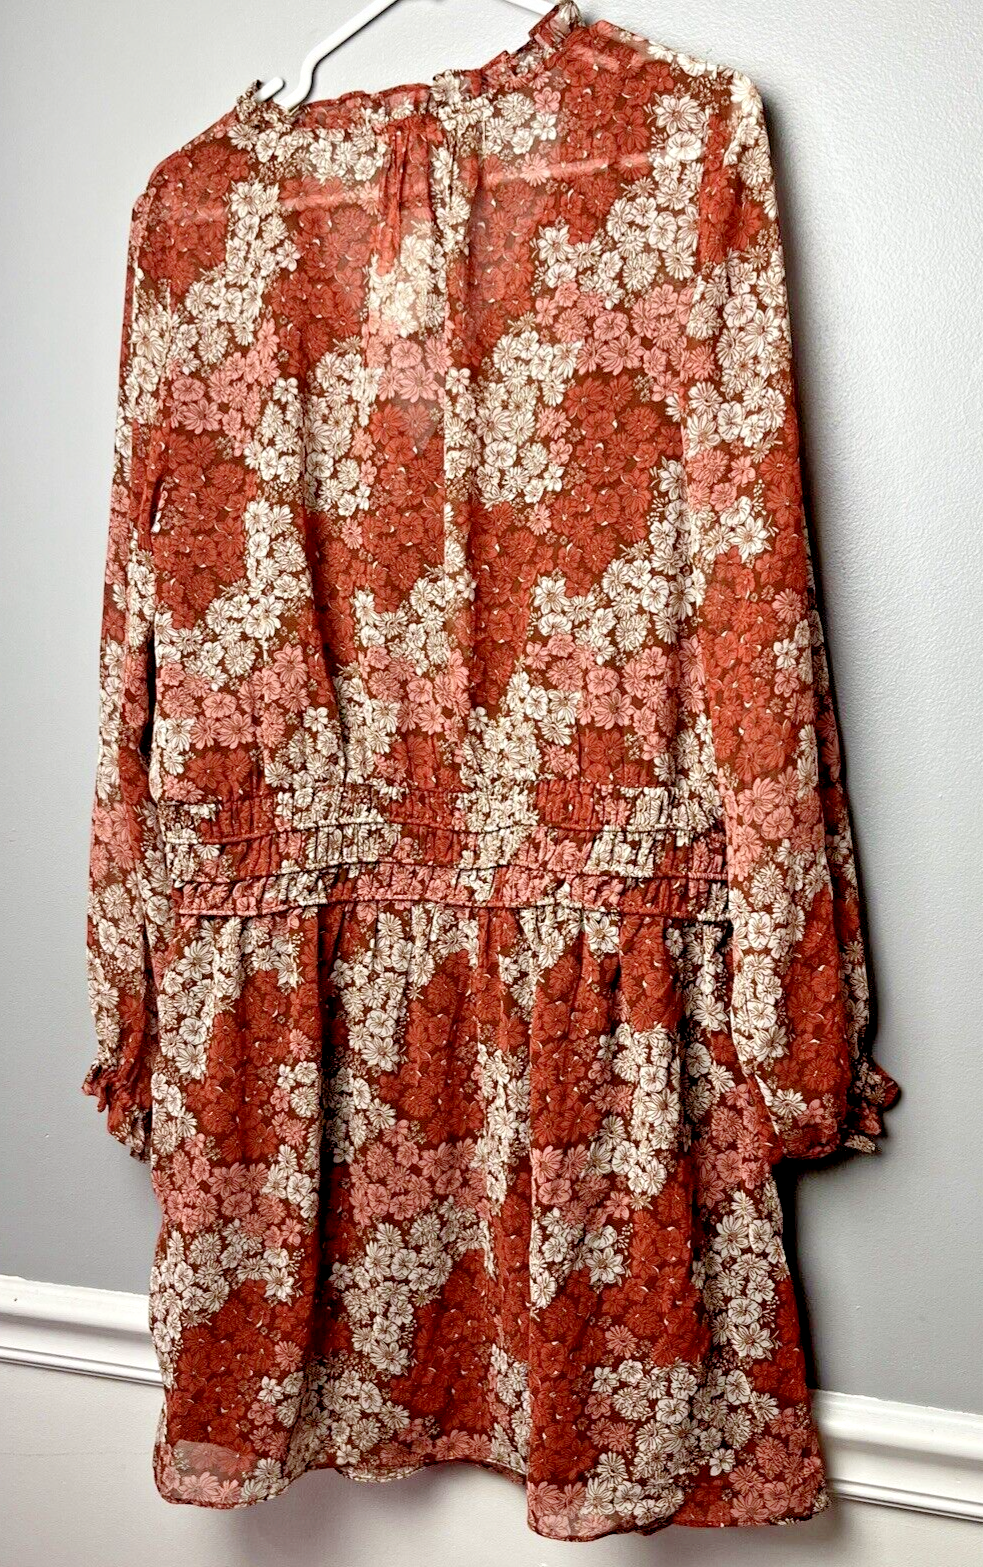 Socialite Women's Long Sleeve Floral Print Smocked Minidress, Red, Size XL, NwT